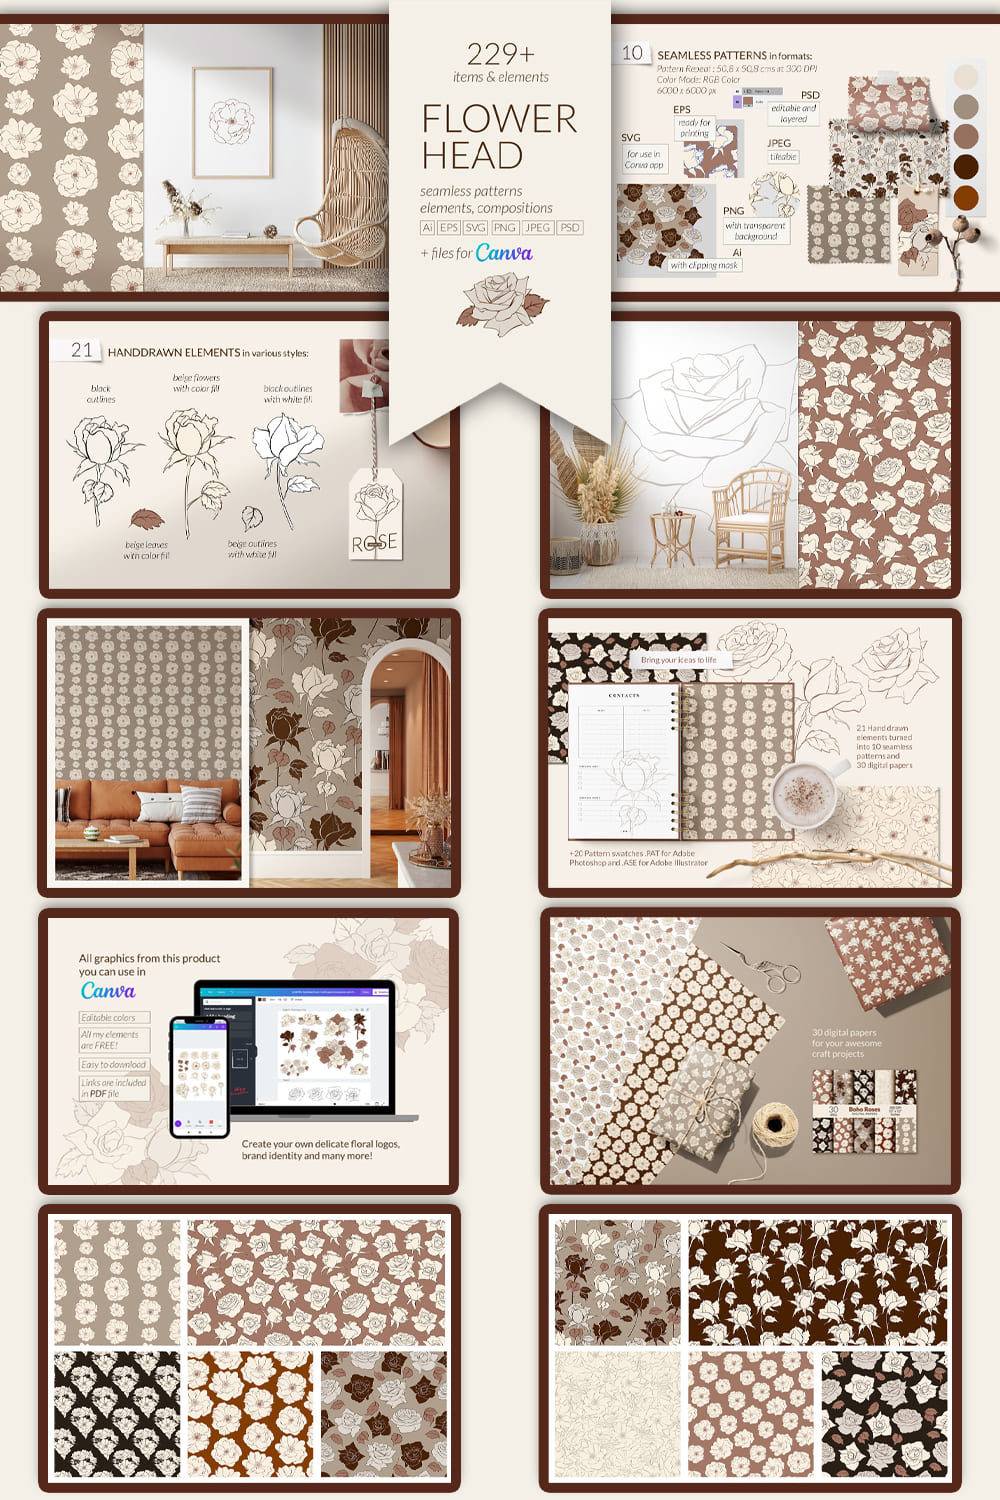 Flowerhead patterns collection - pinterest image preview.